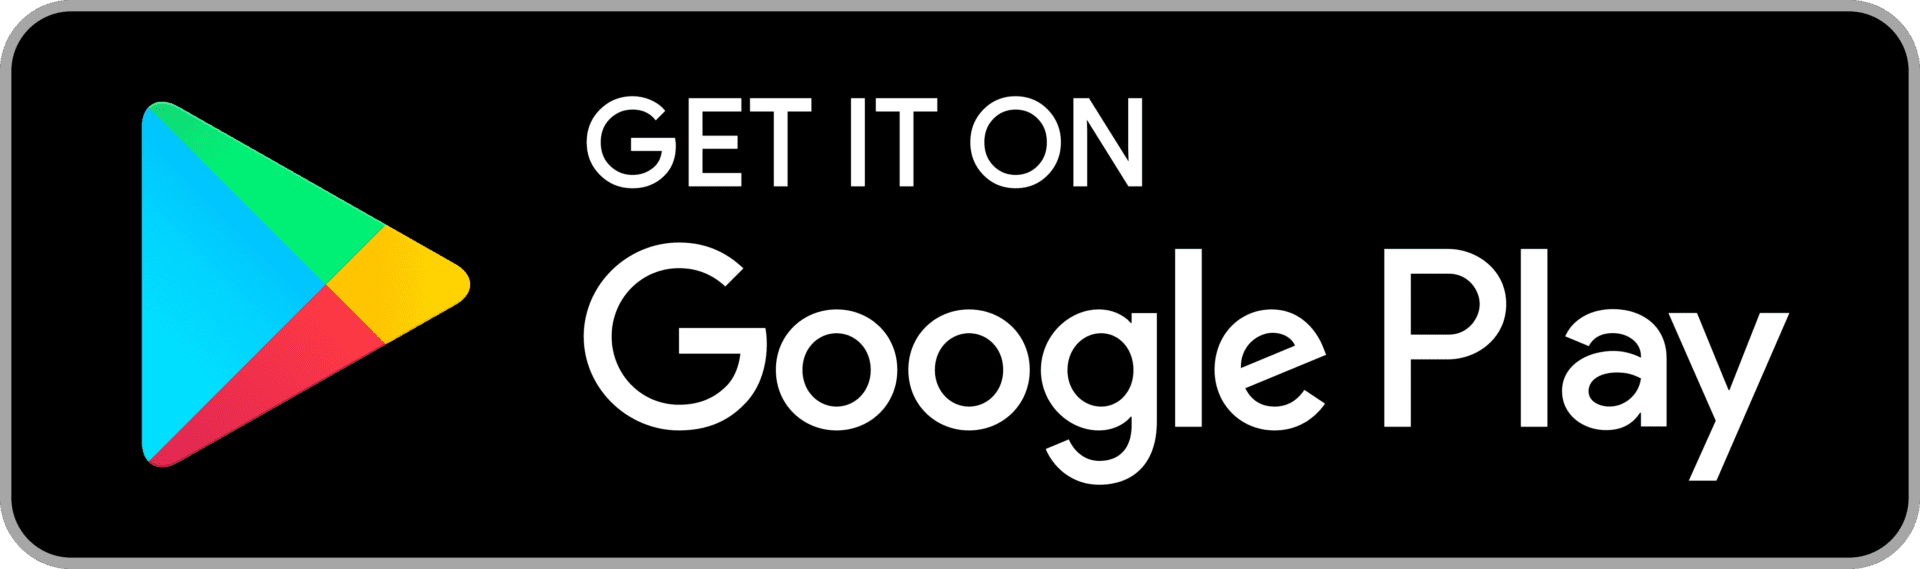 A black and white image of the google logo.